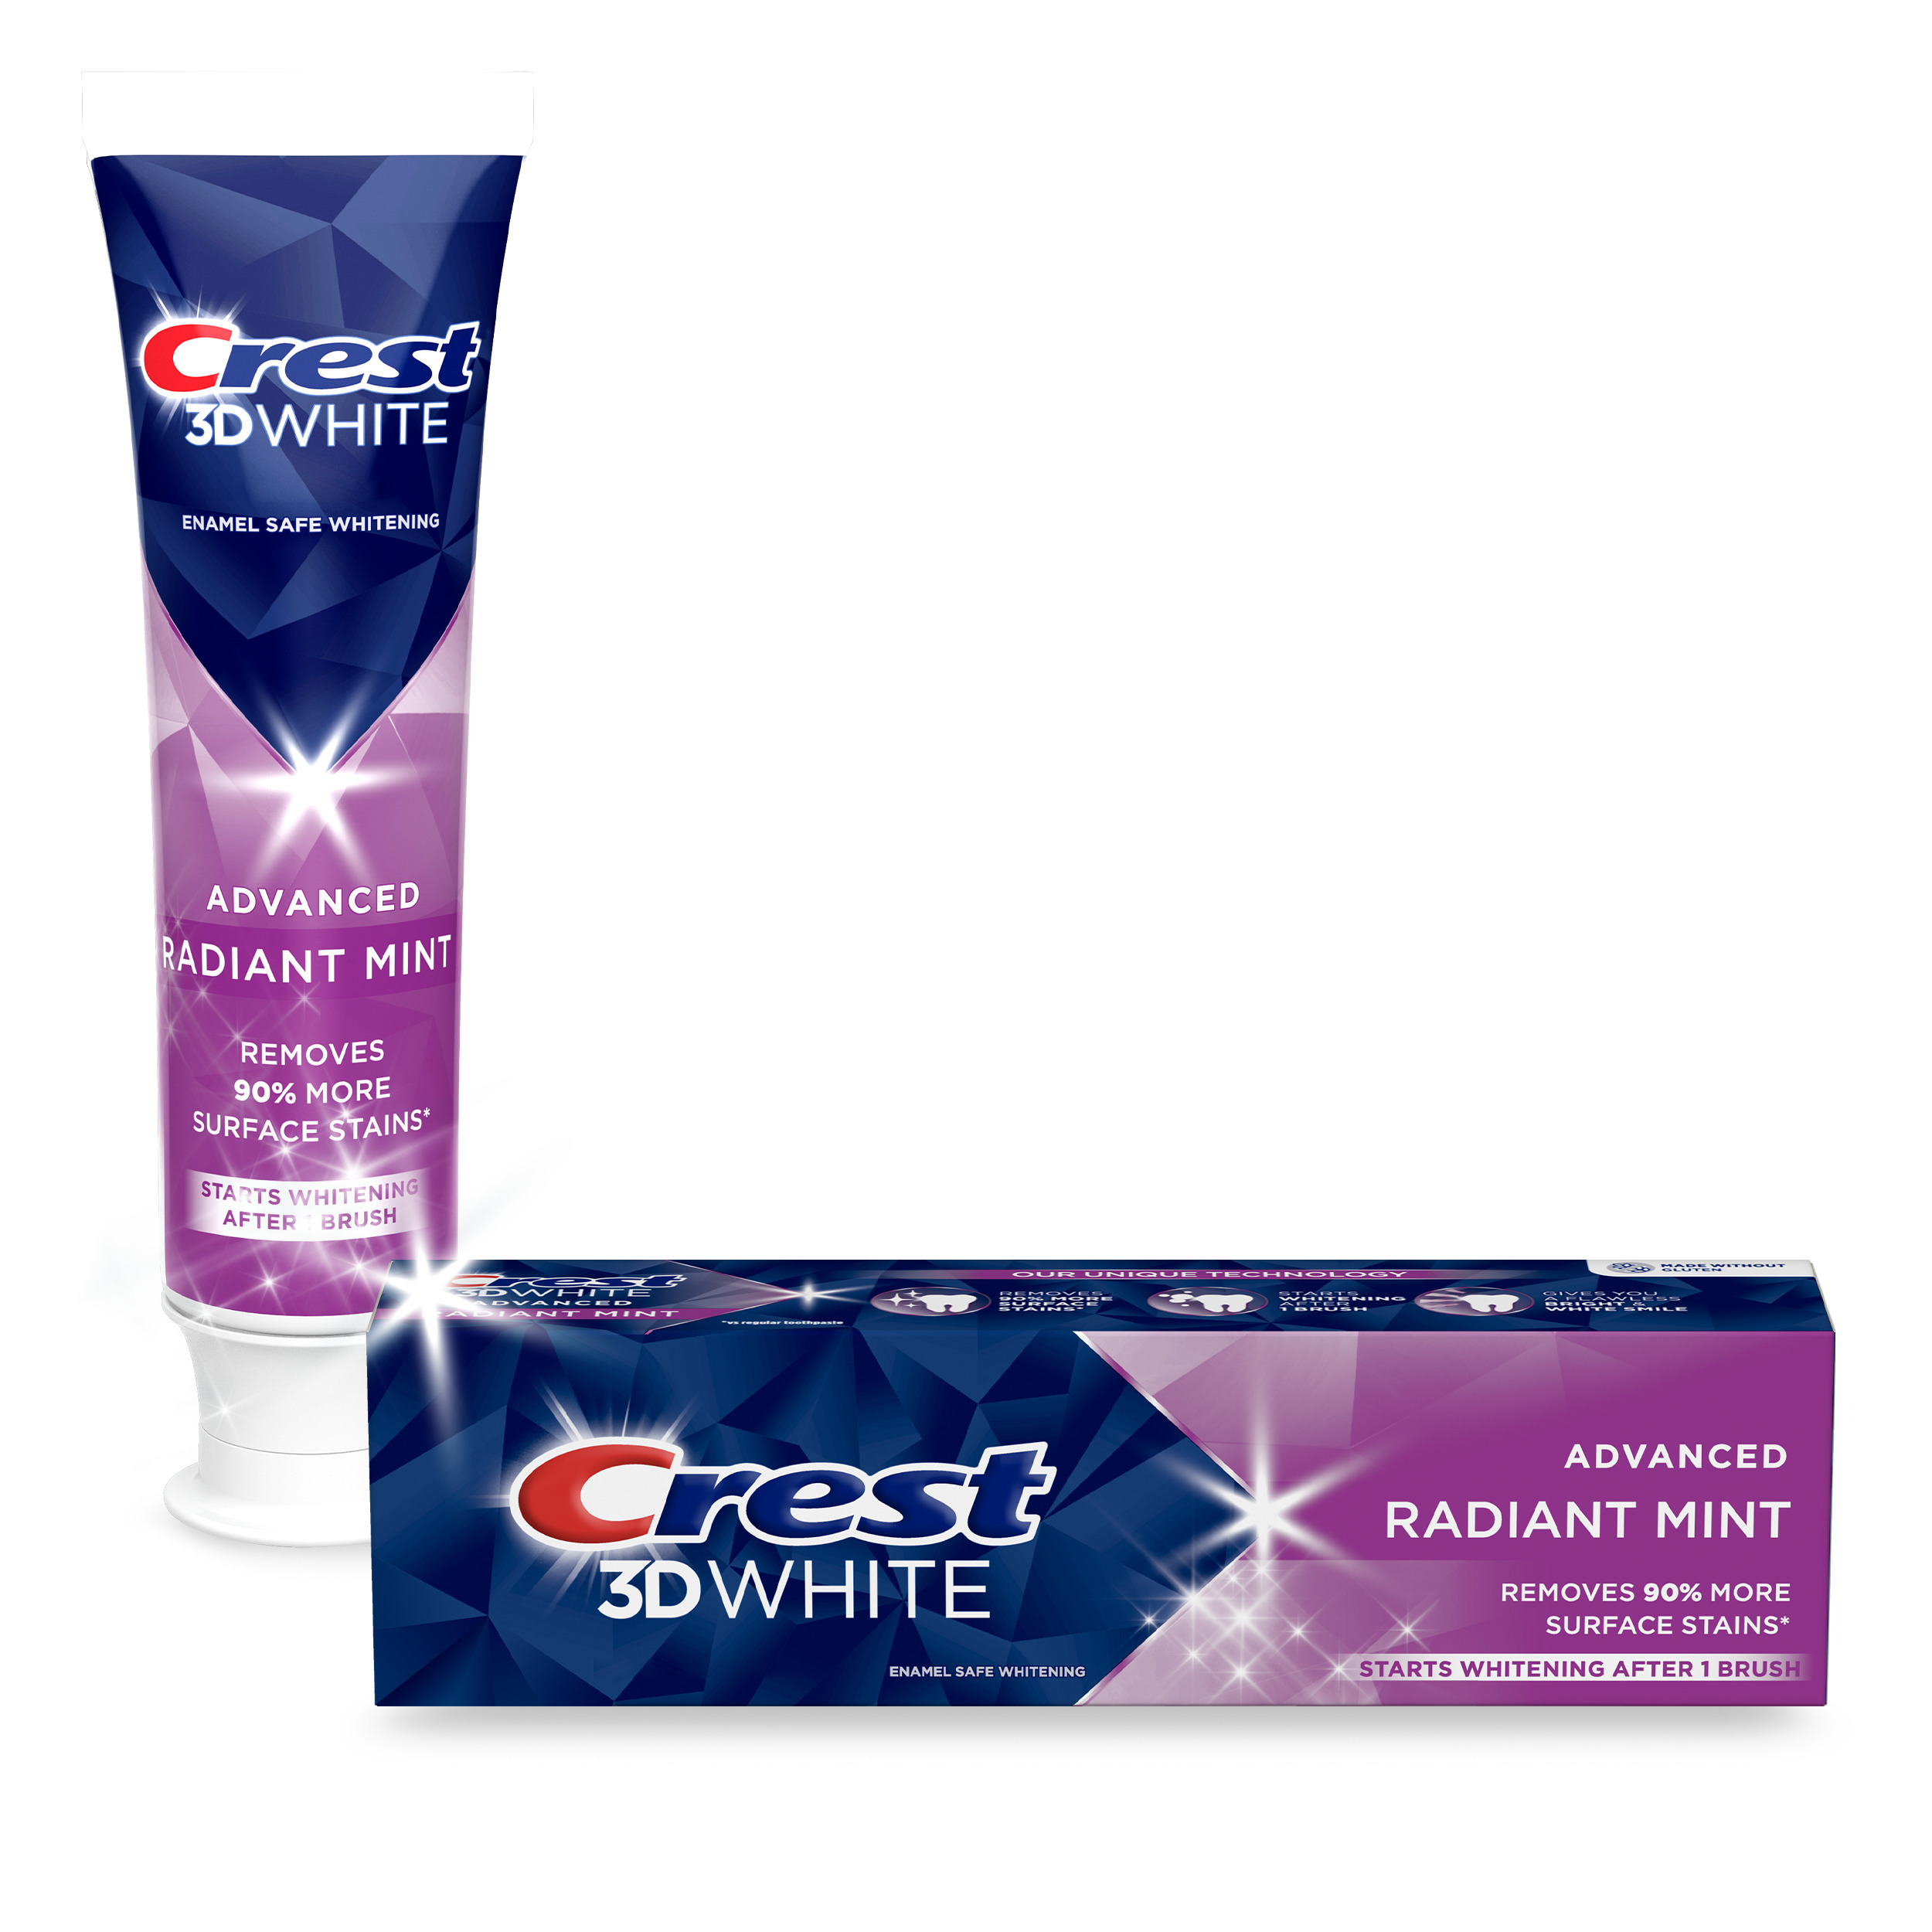 Crest 3D White Advanced Radiant Mint Whitening Toothpaste, 2.7 oz - image 1 of 9